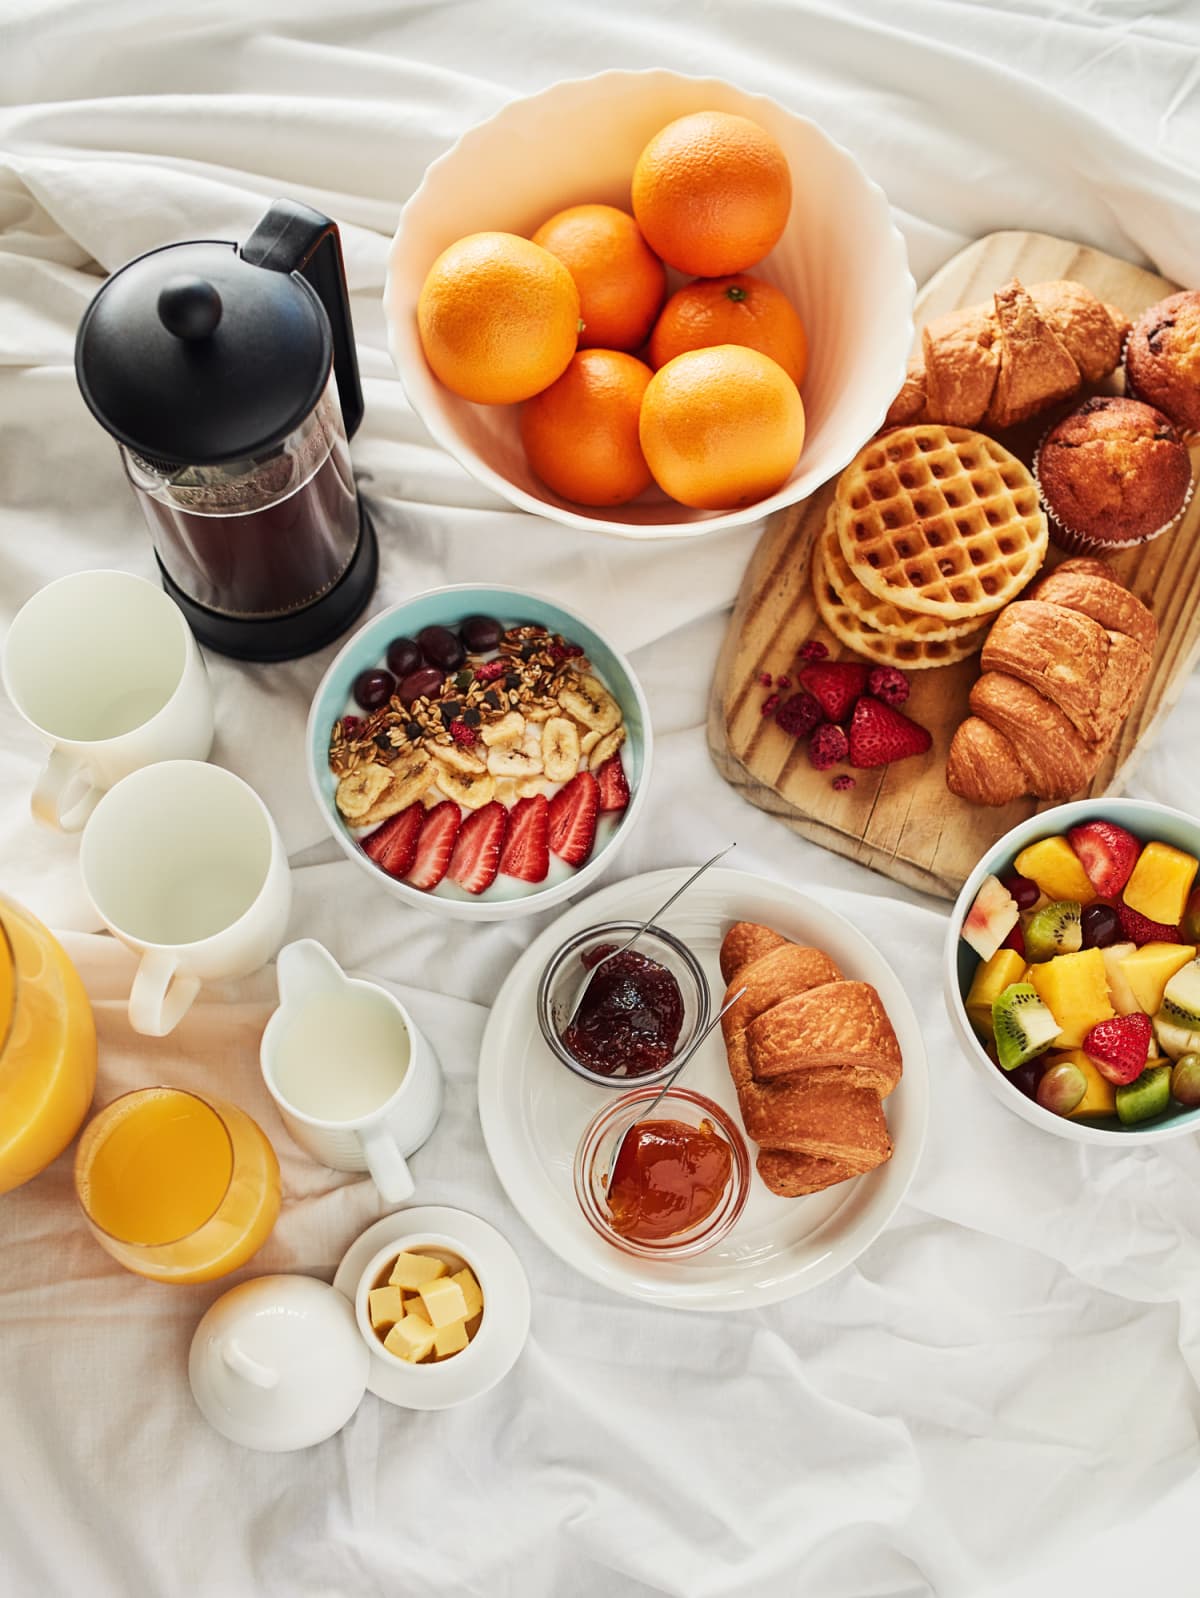 A delicious breakfast spread on a bed at home.